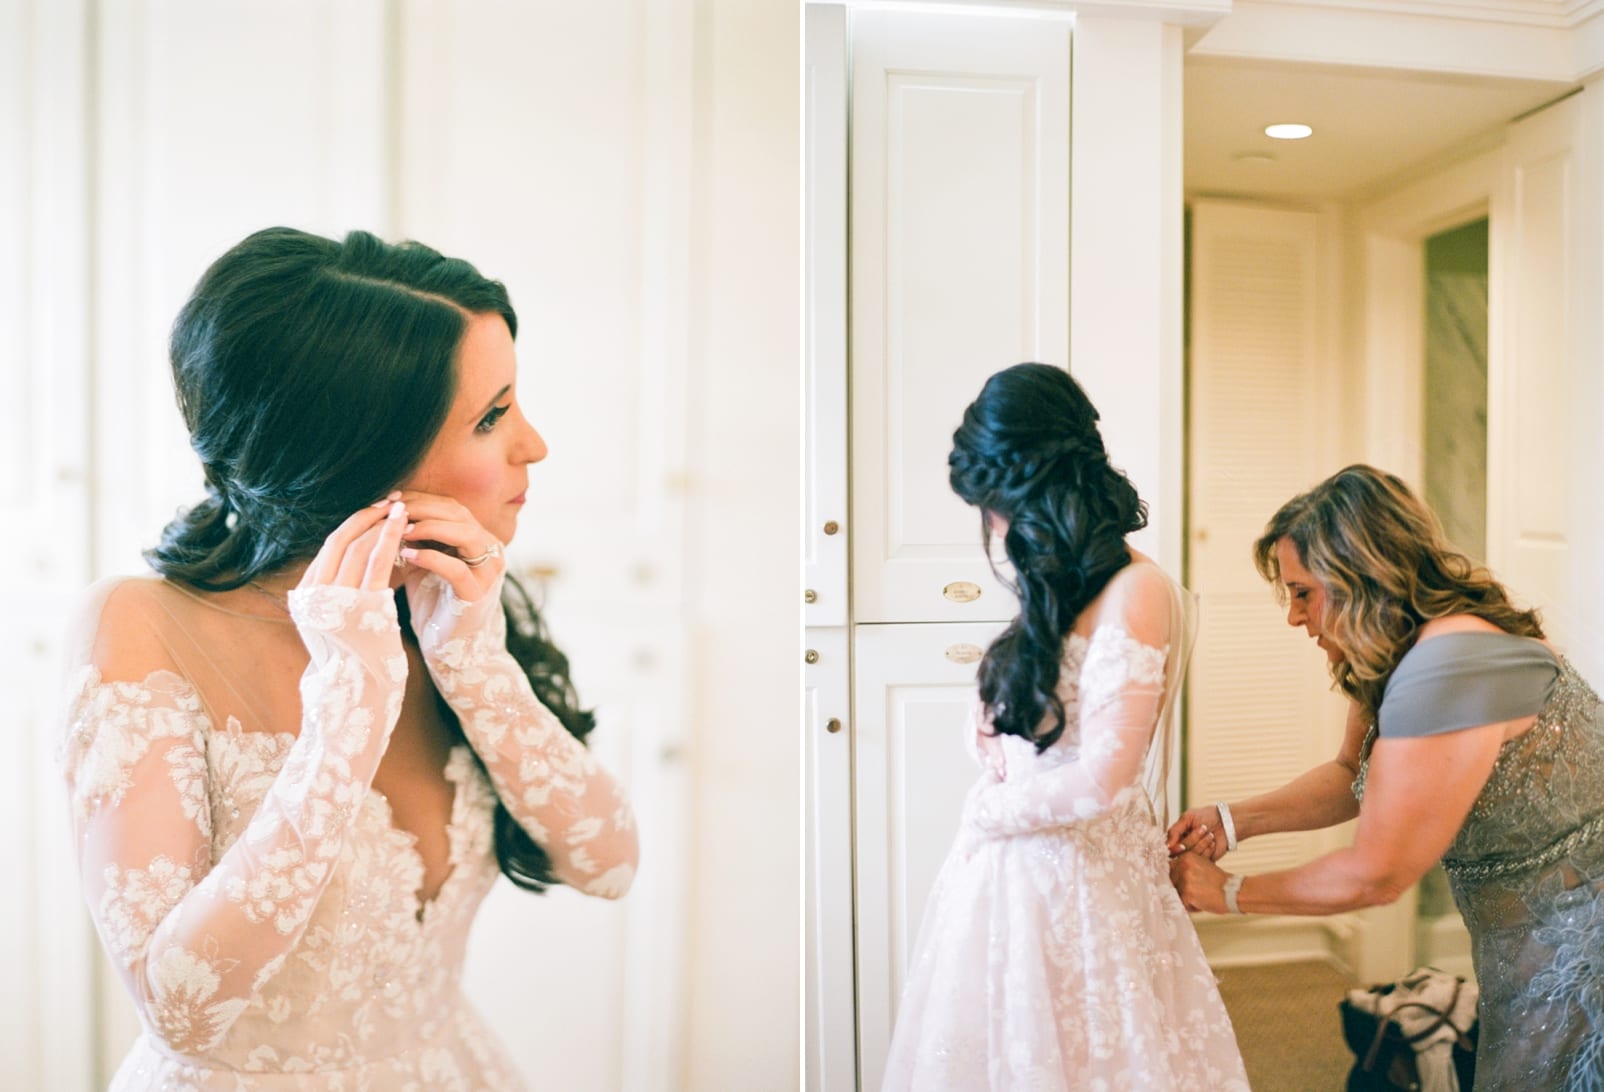 Hayley Paige wedding gown with long lace sleeves and bride putting in her earrings photo